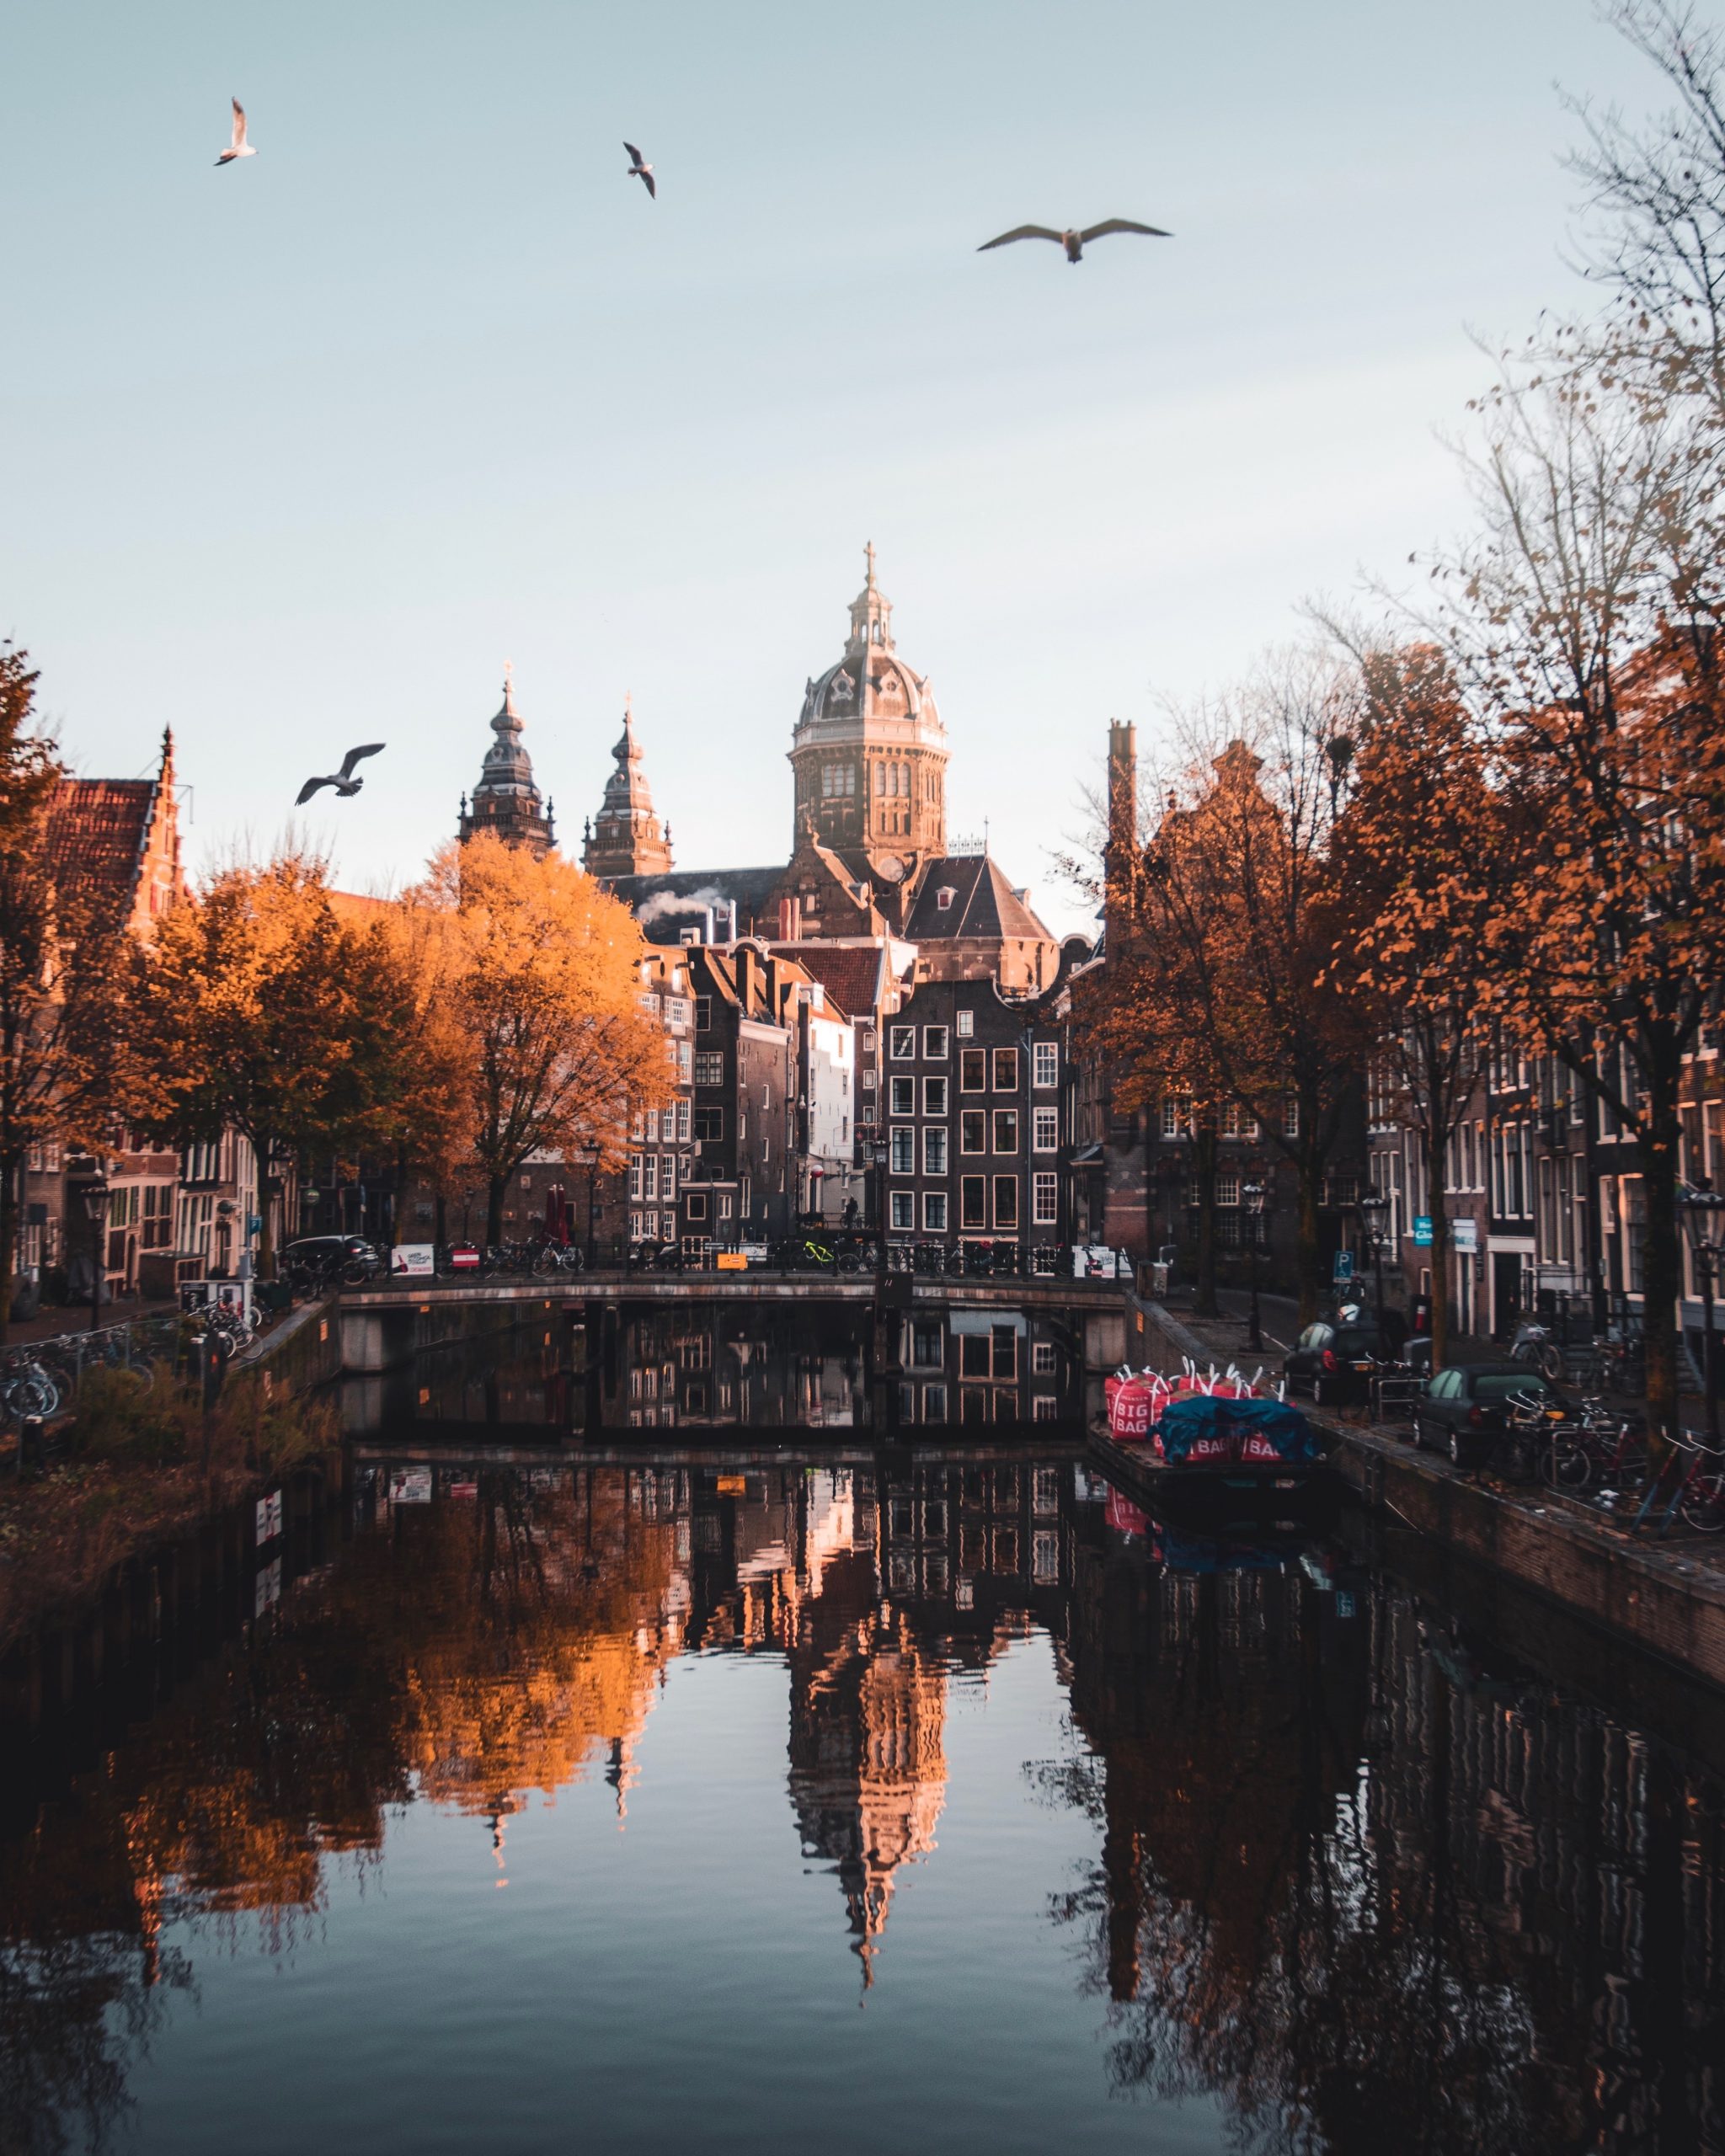 Amsterdam, among the cleanest cities in the world